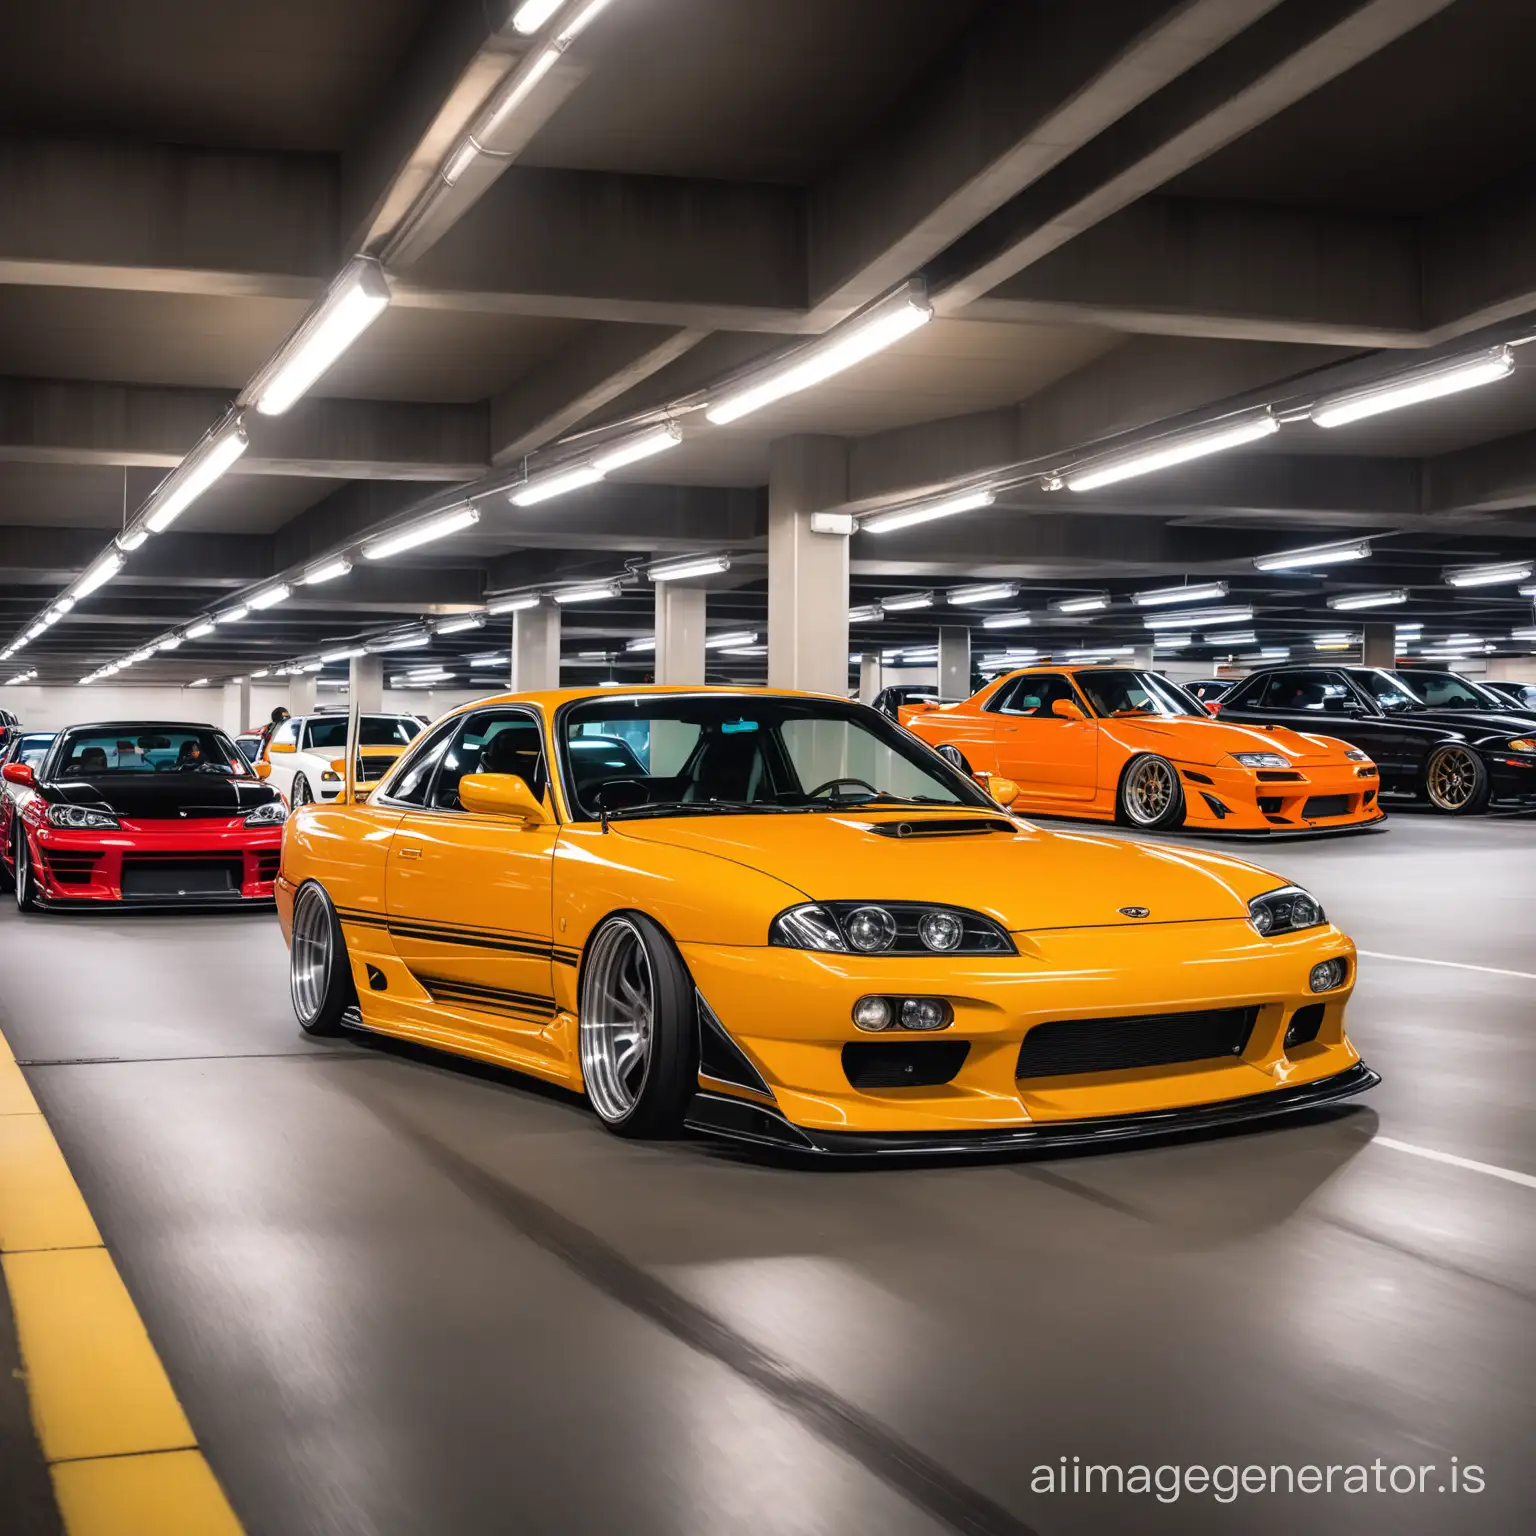 lively car meet in a parking garage with cars drifting like tokyo drift